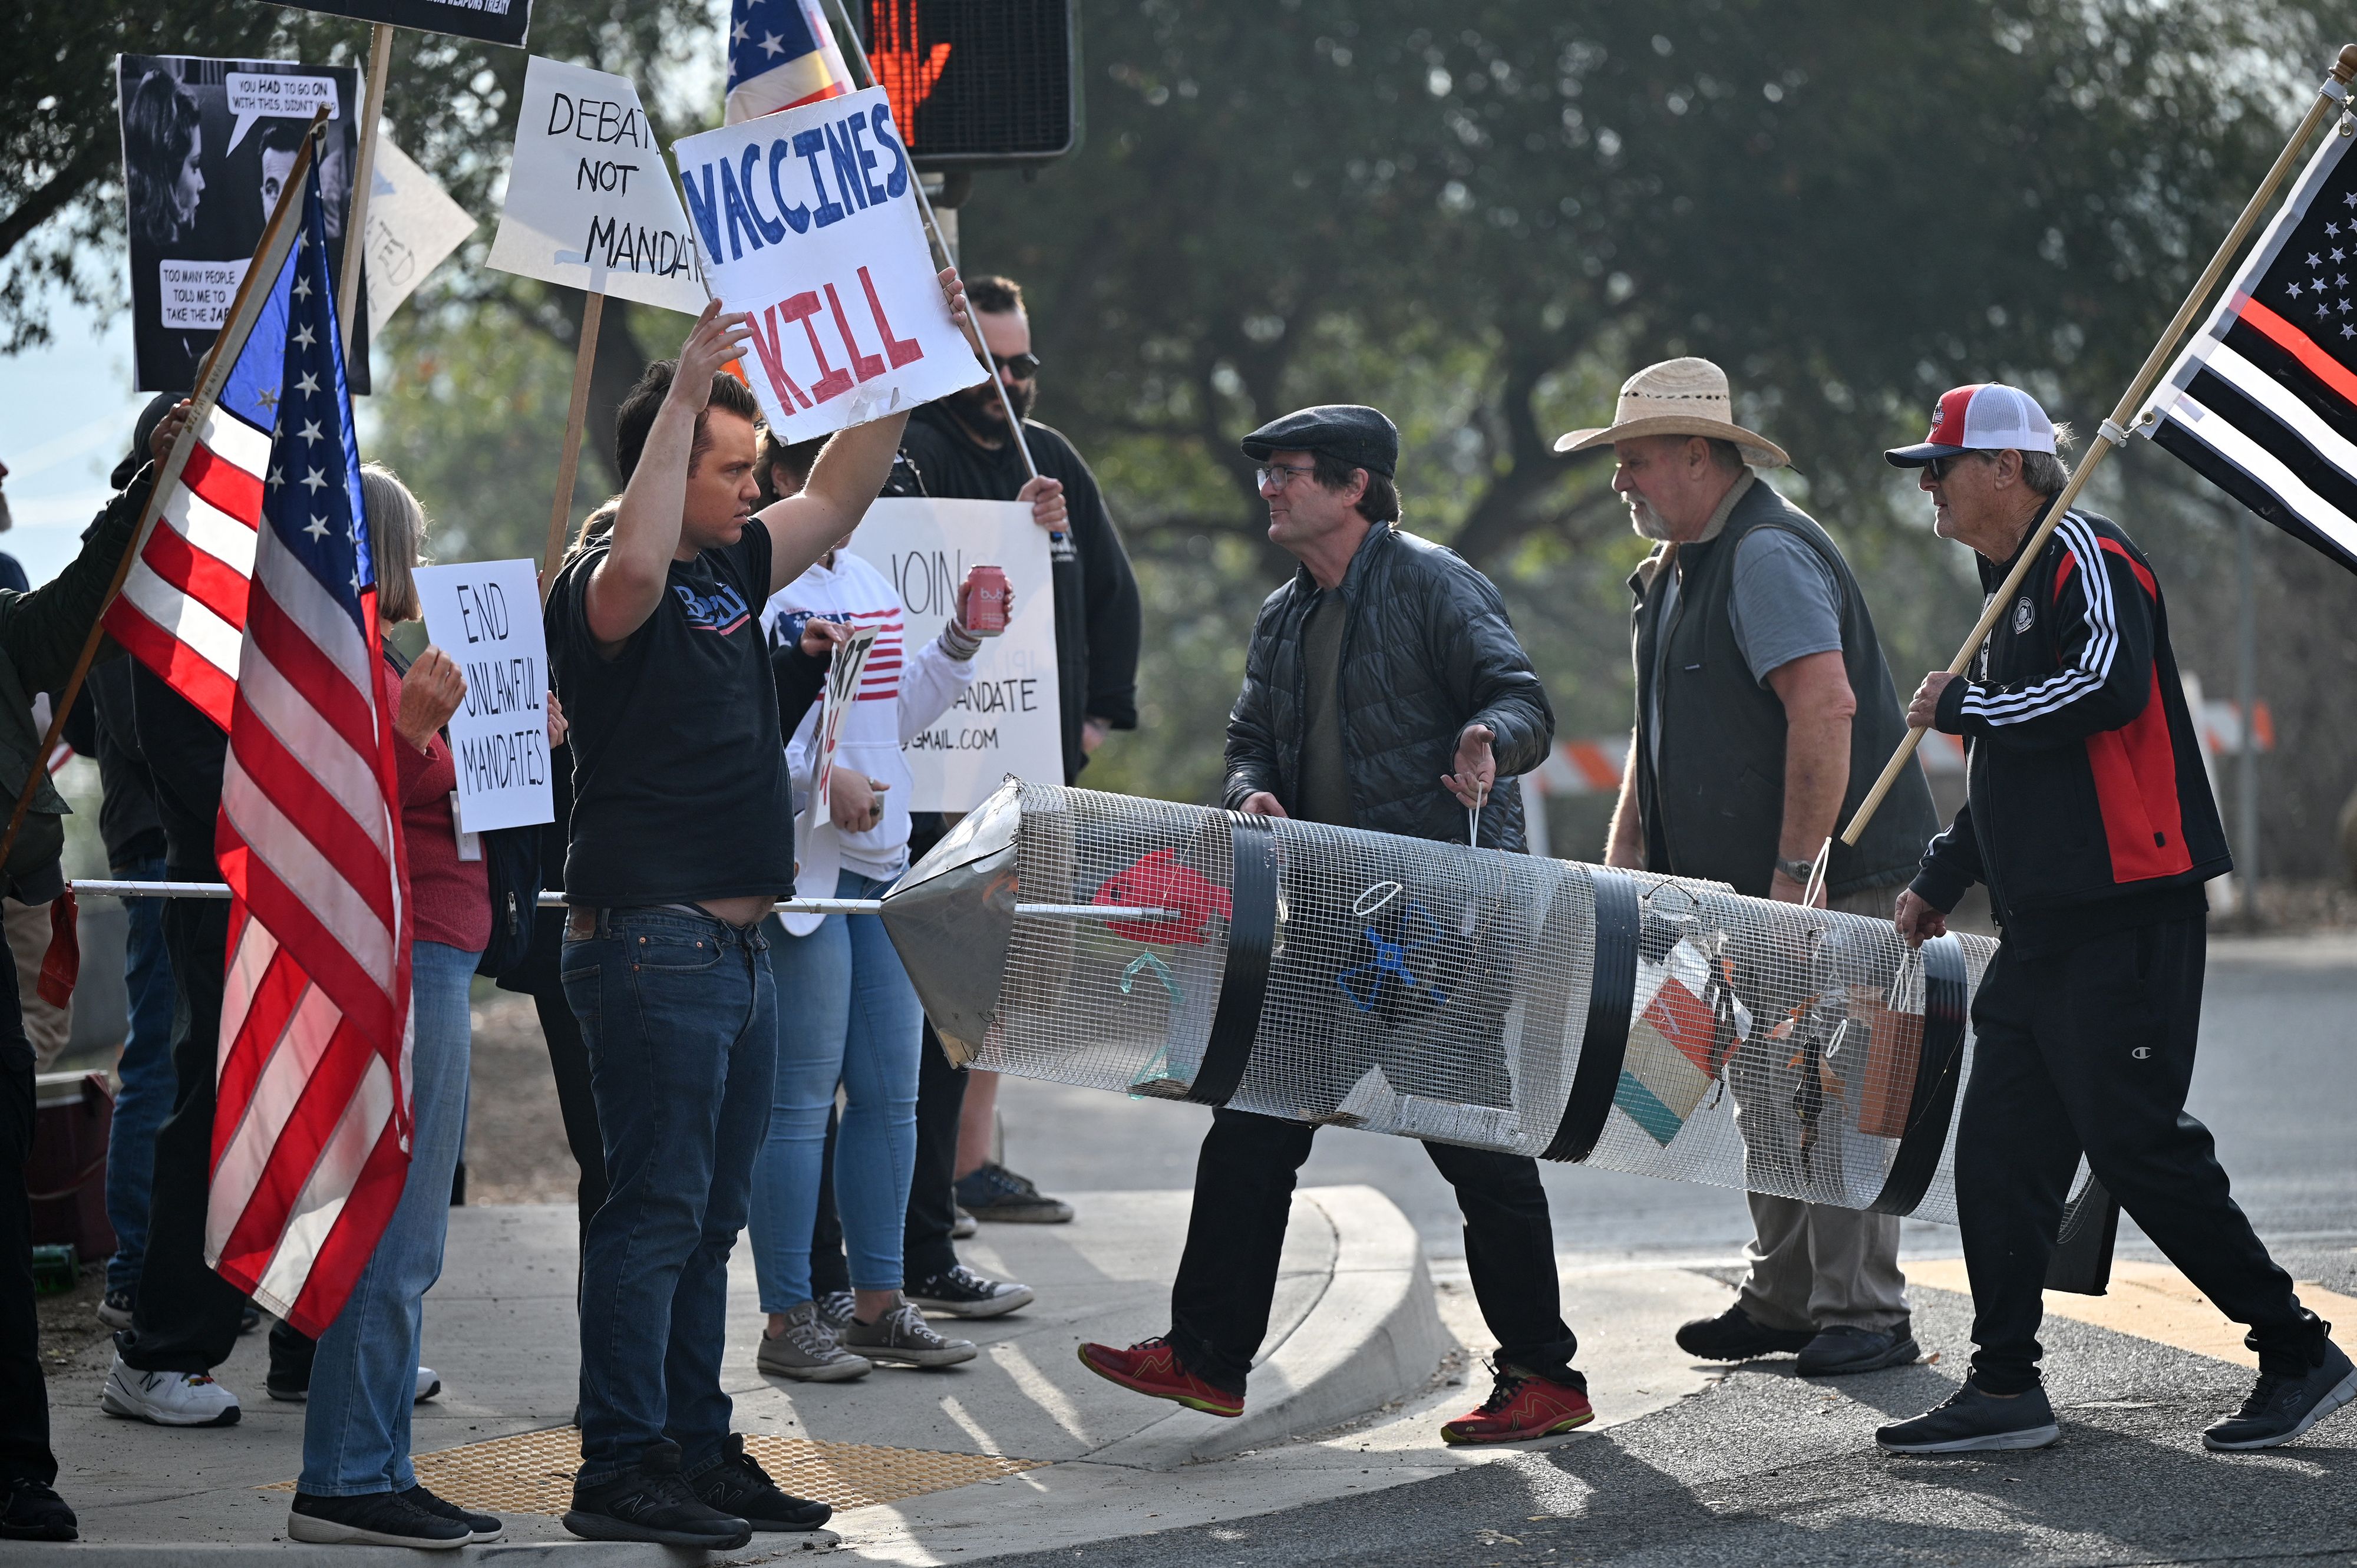 Workers at Nasa’s Jet Propulsion Laboratory (JPL) and their supporters carry a representation of a syringe during a protest on 1 November outside JPL in Pasadena, California against a US government mandate requiring all federal employees to received the Covid-19 coronavirus vaccine